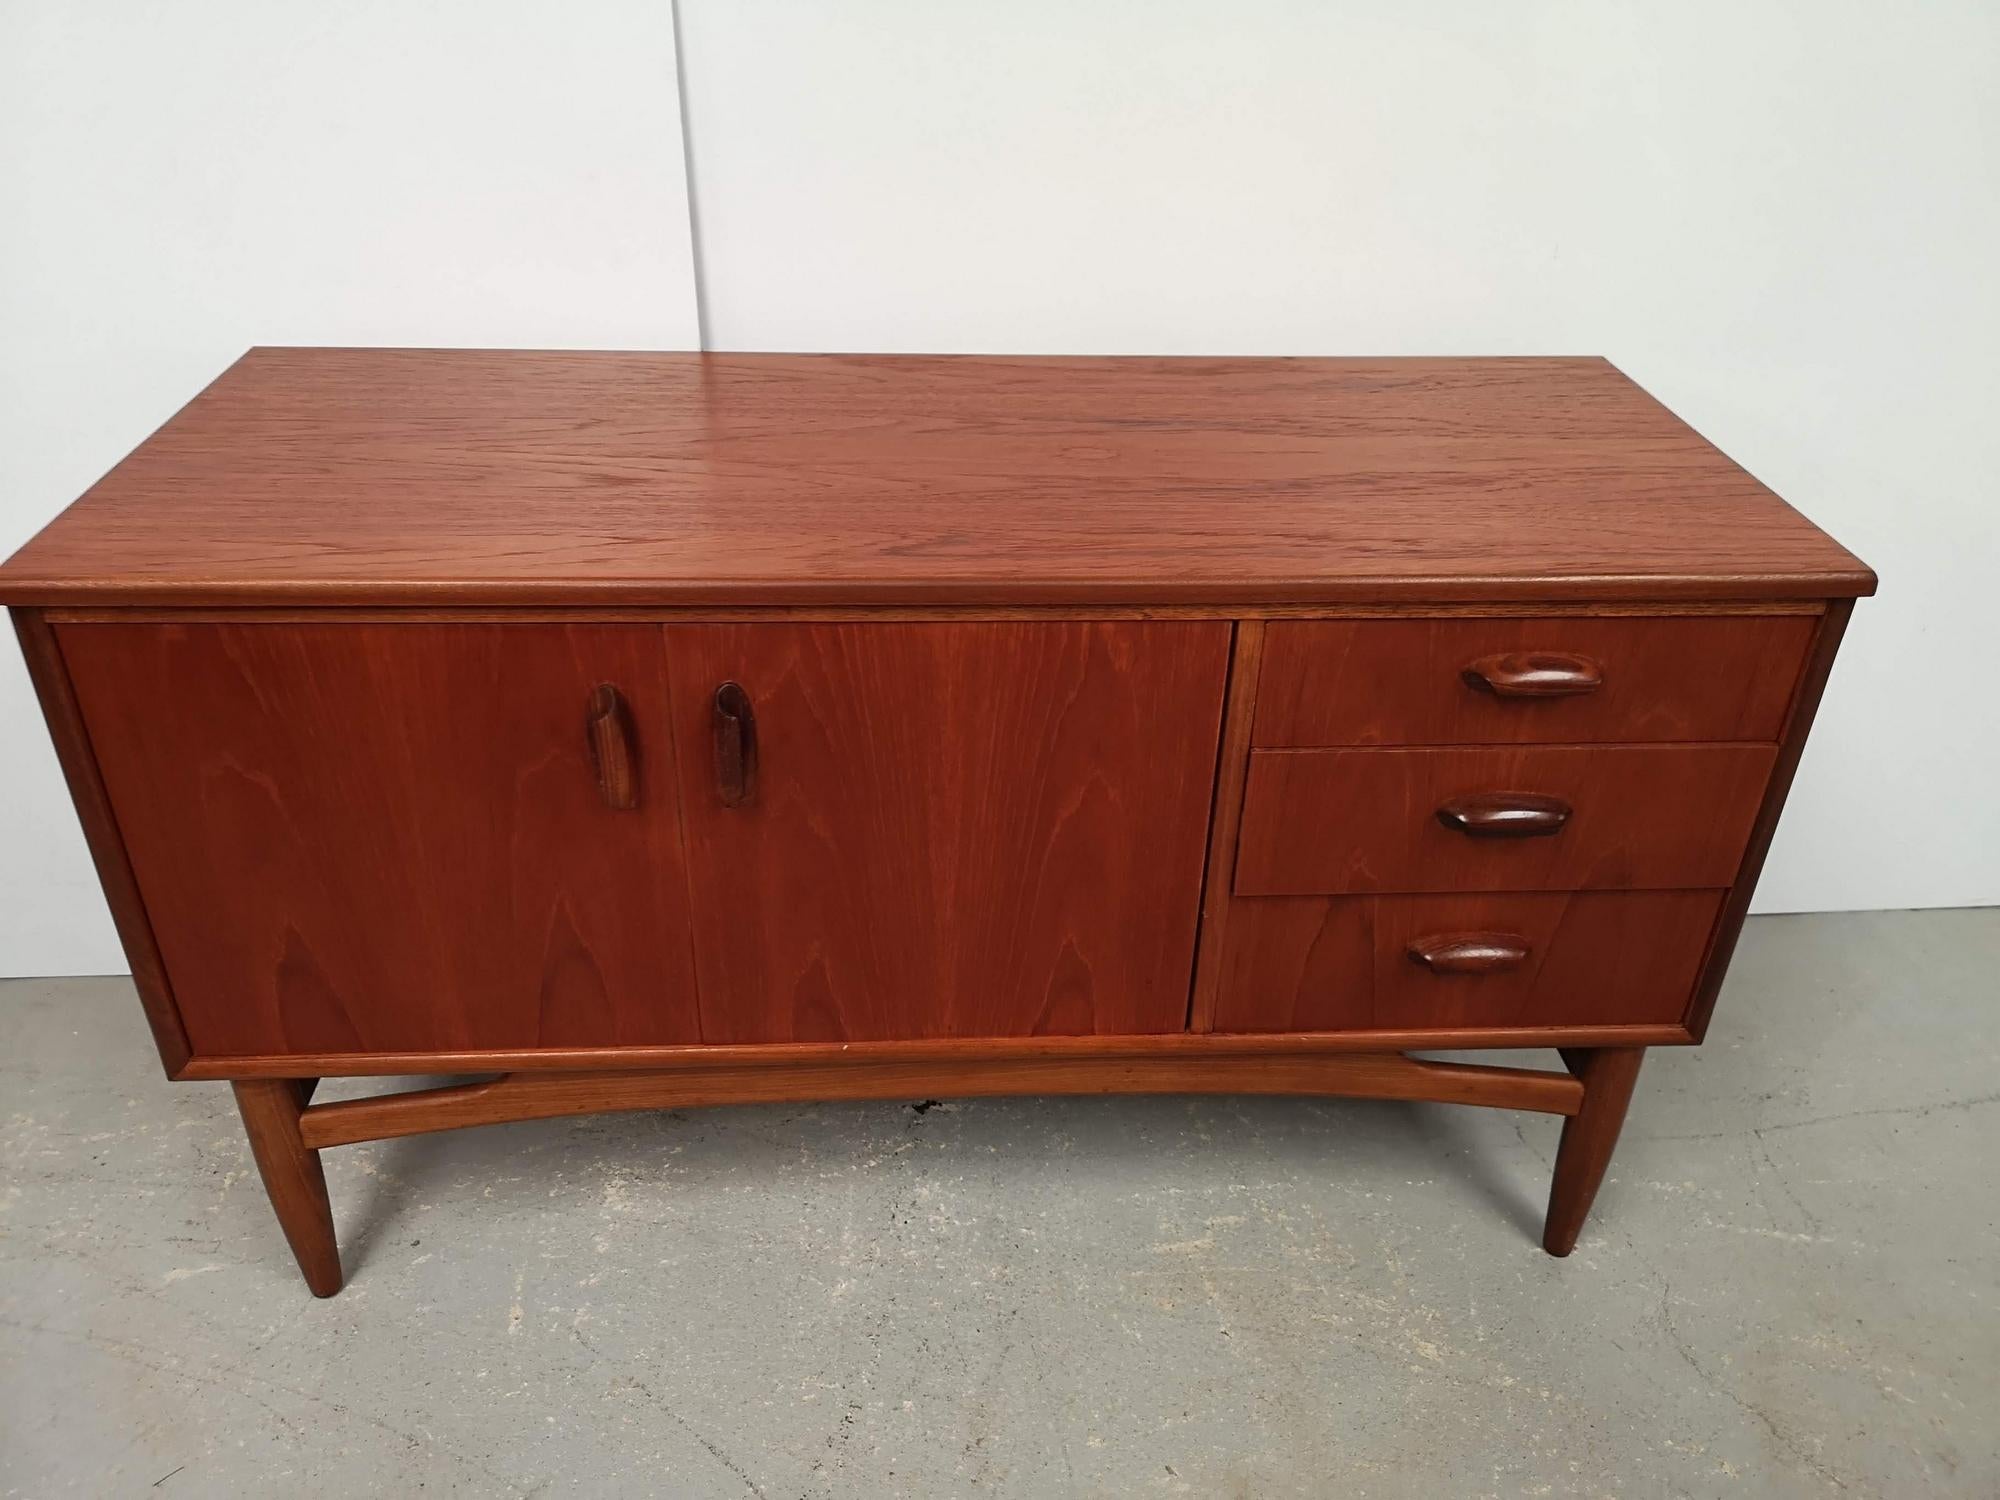 A vintage teak sideboard, its wooden handles are design, quite long.
On the left the doors open onto a space with a shelf.
On the right a series of three drawers of different heights.
The top is rectangular.
The base has a tapered design, with a